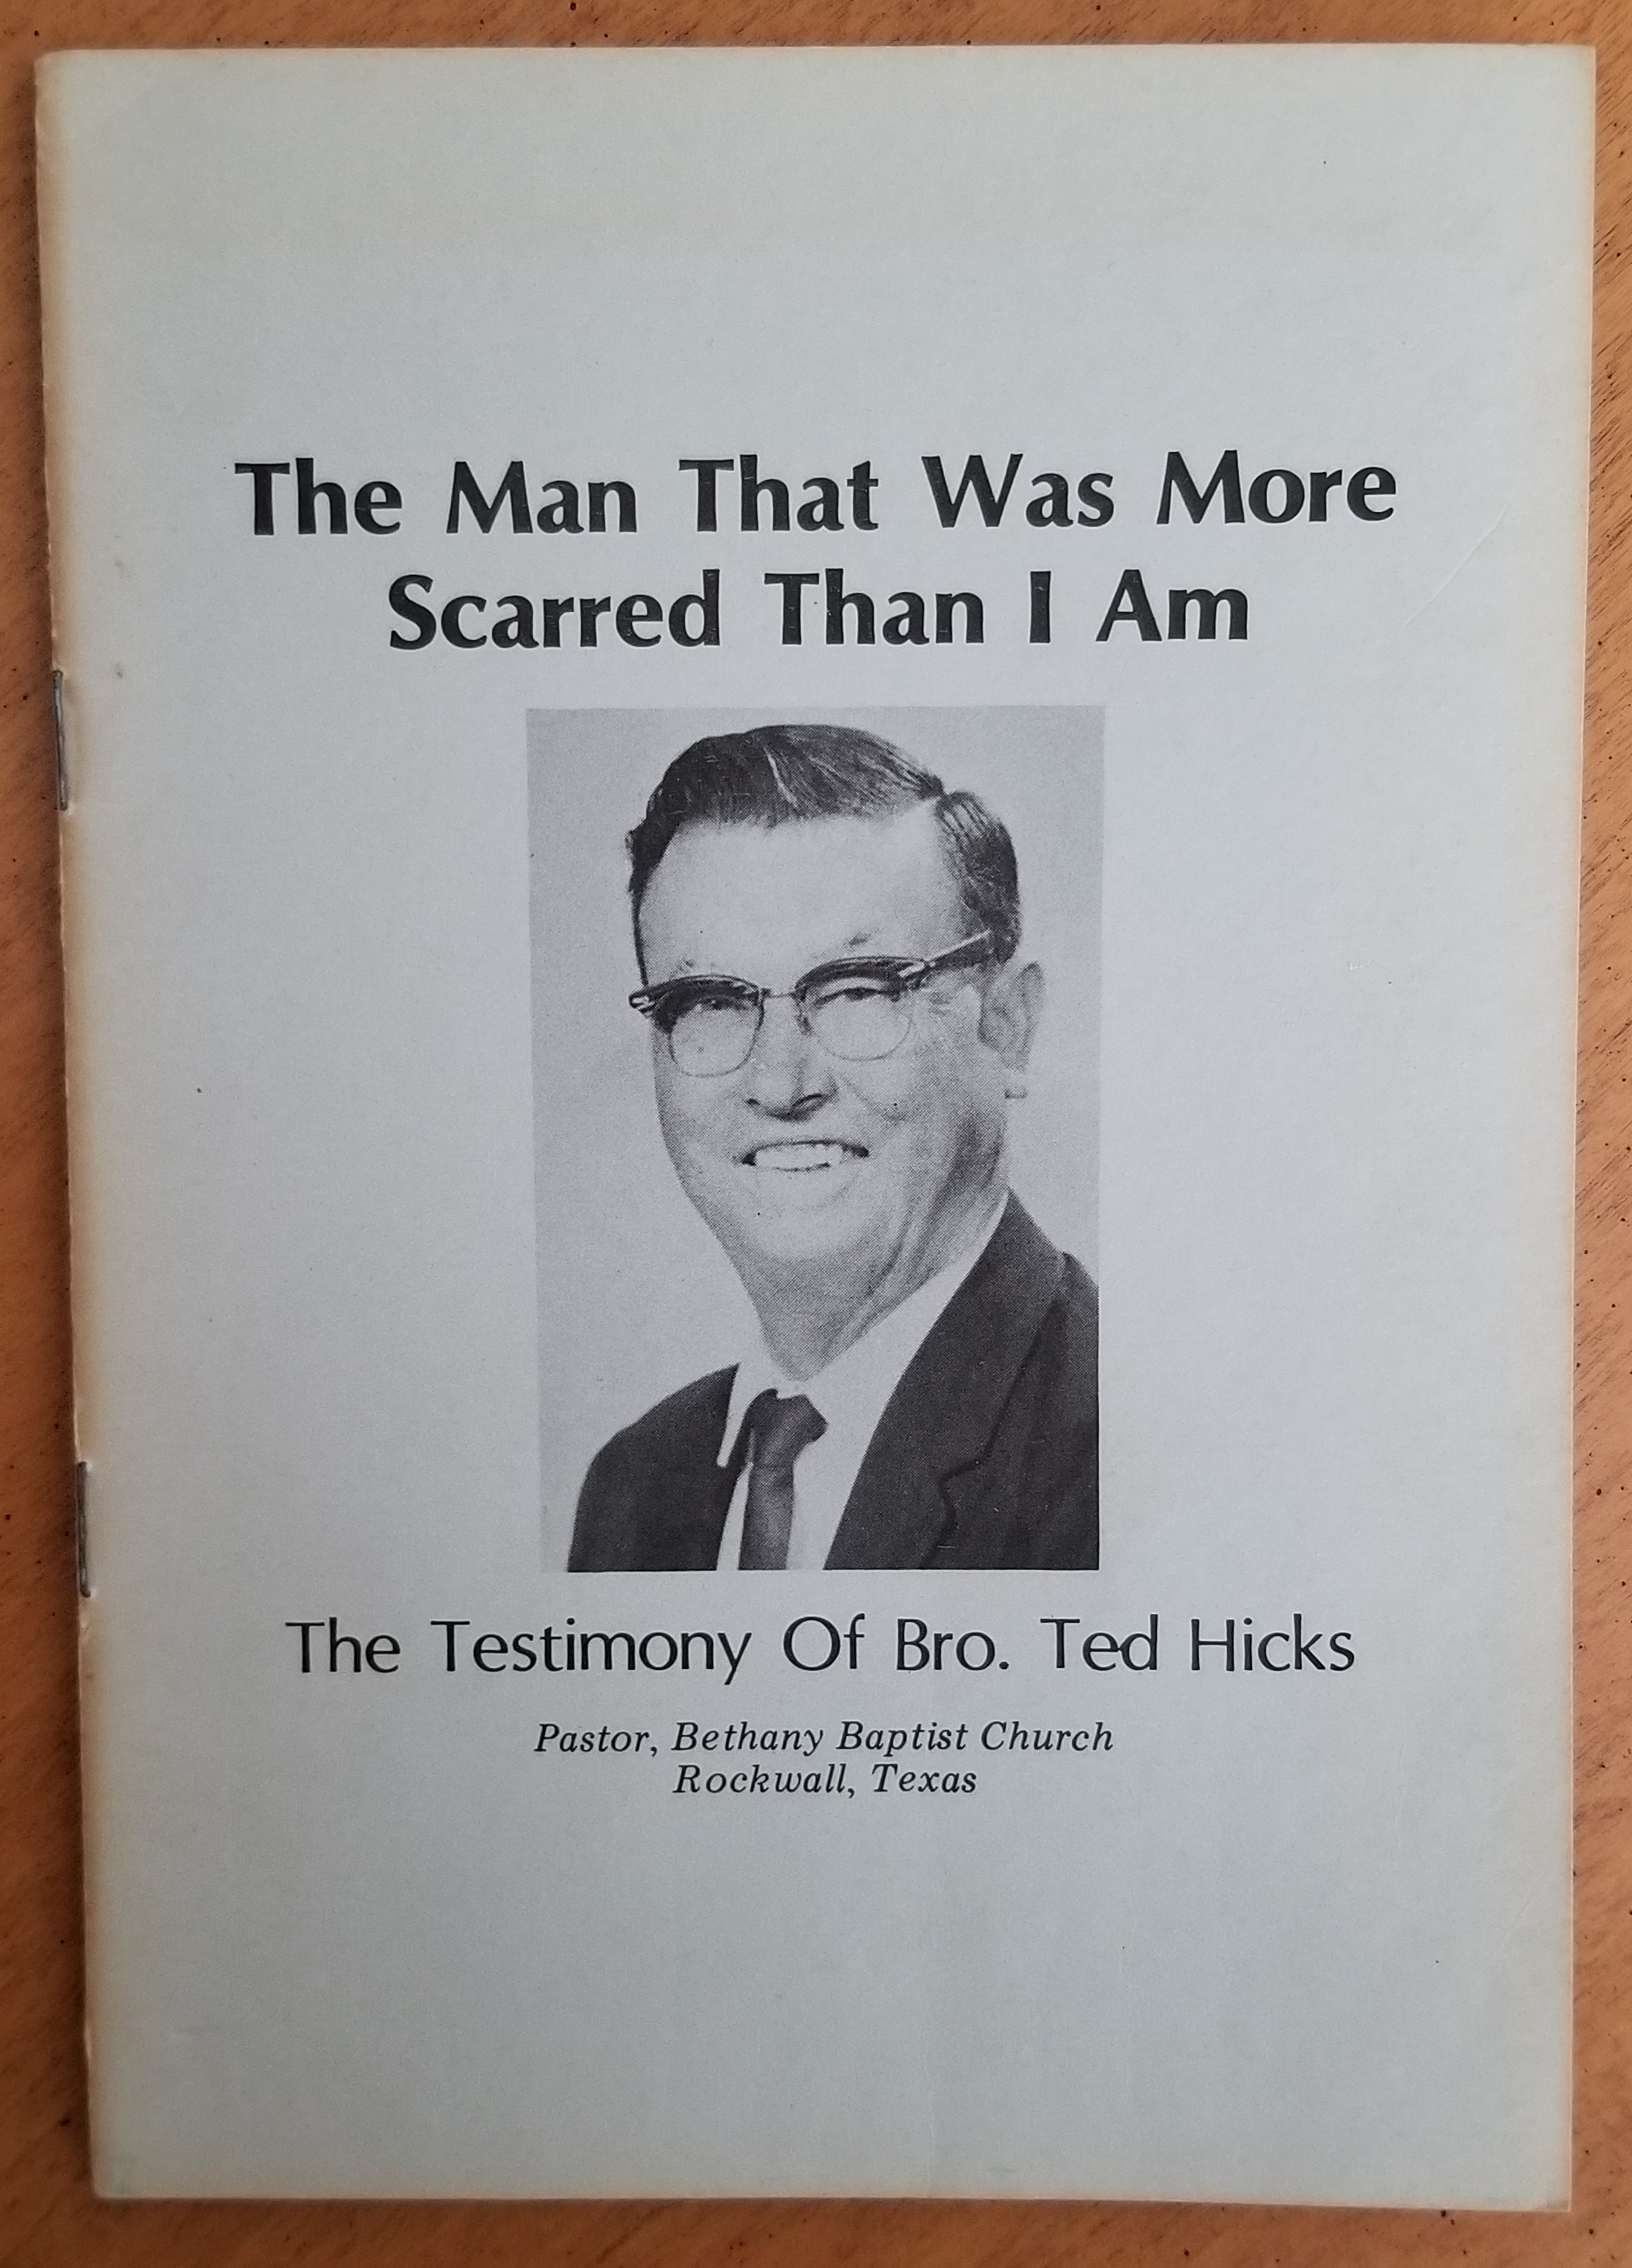 the self-published paperback by Dr. Ted Hicks